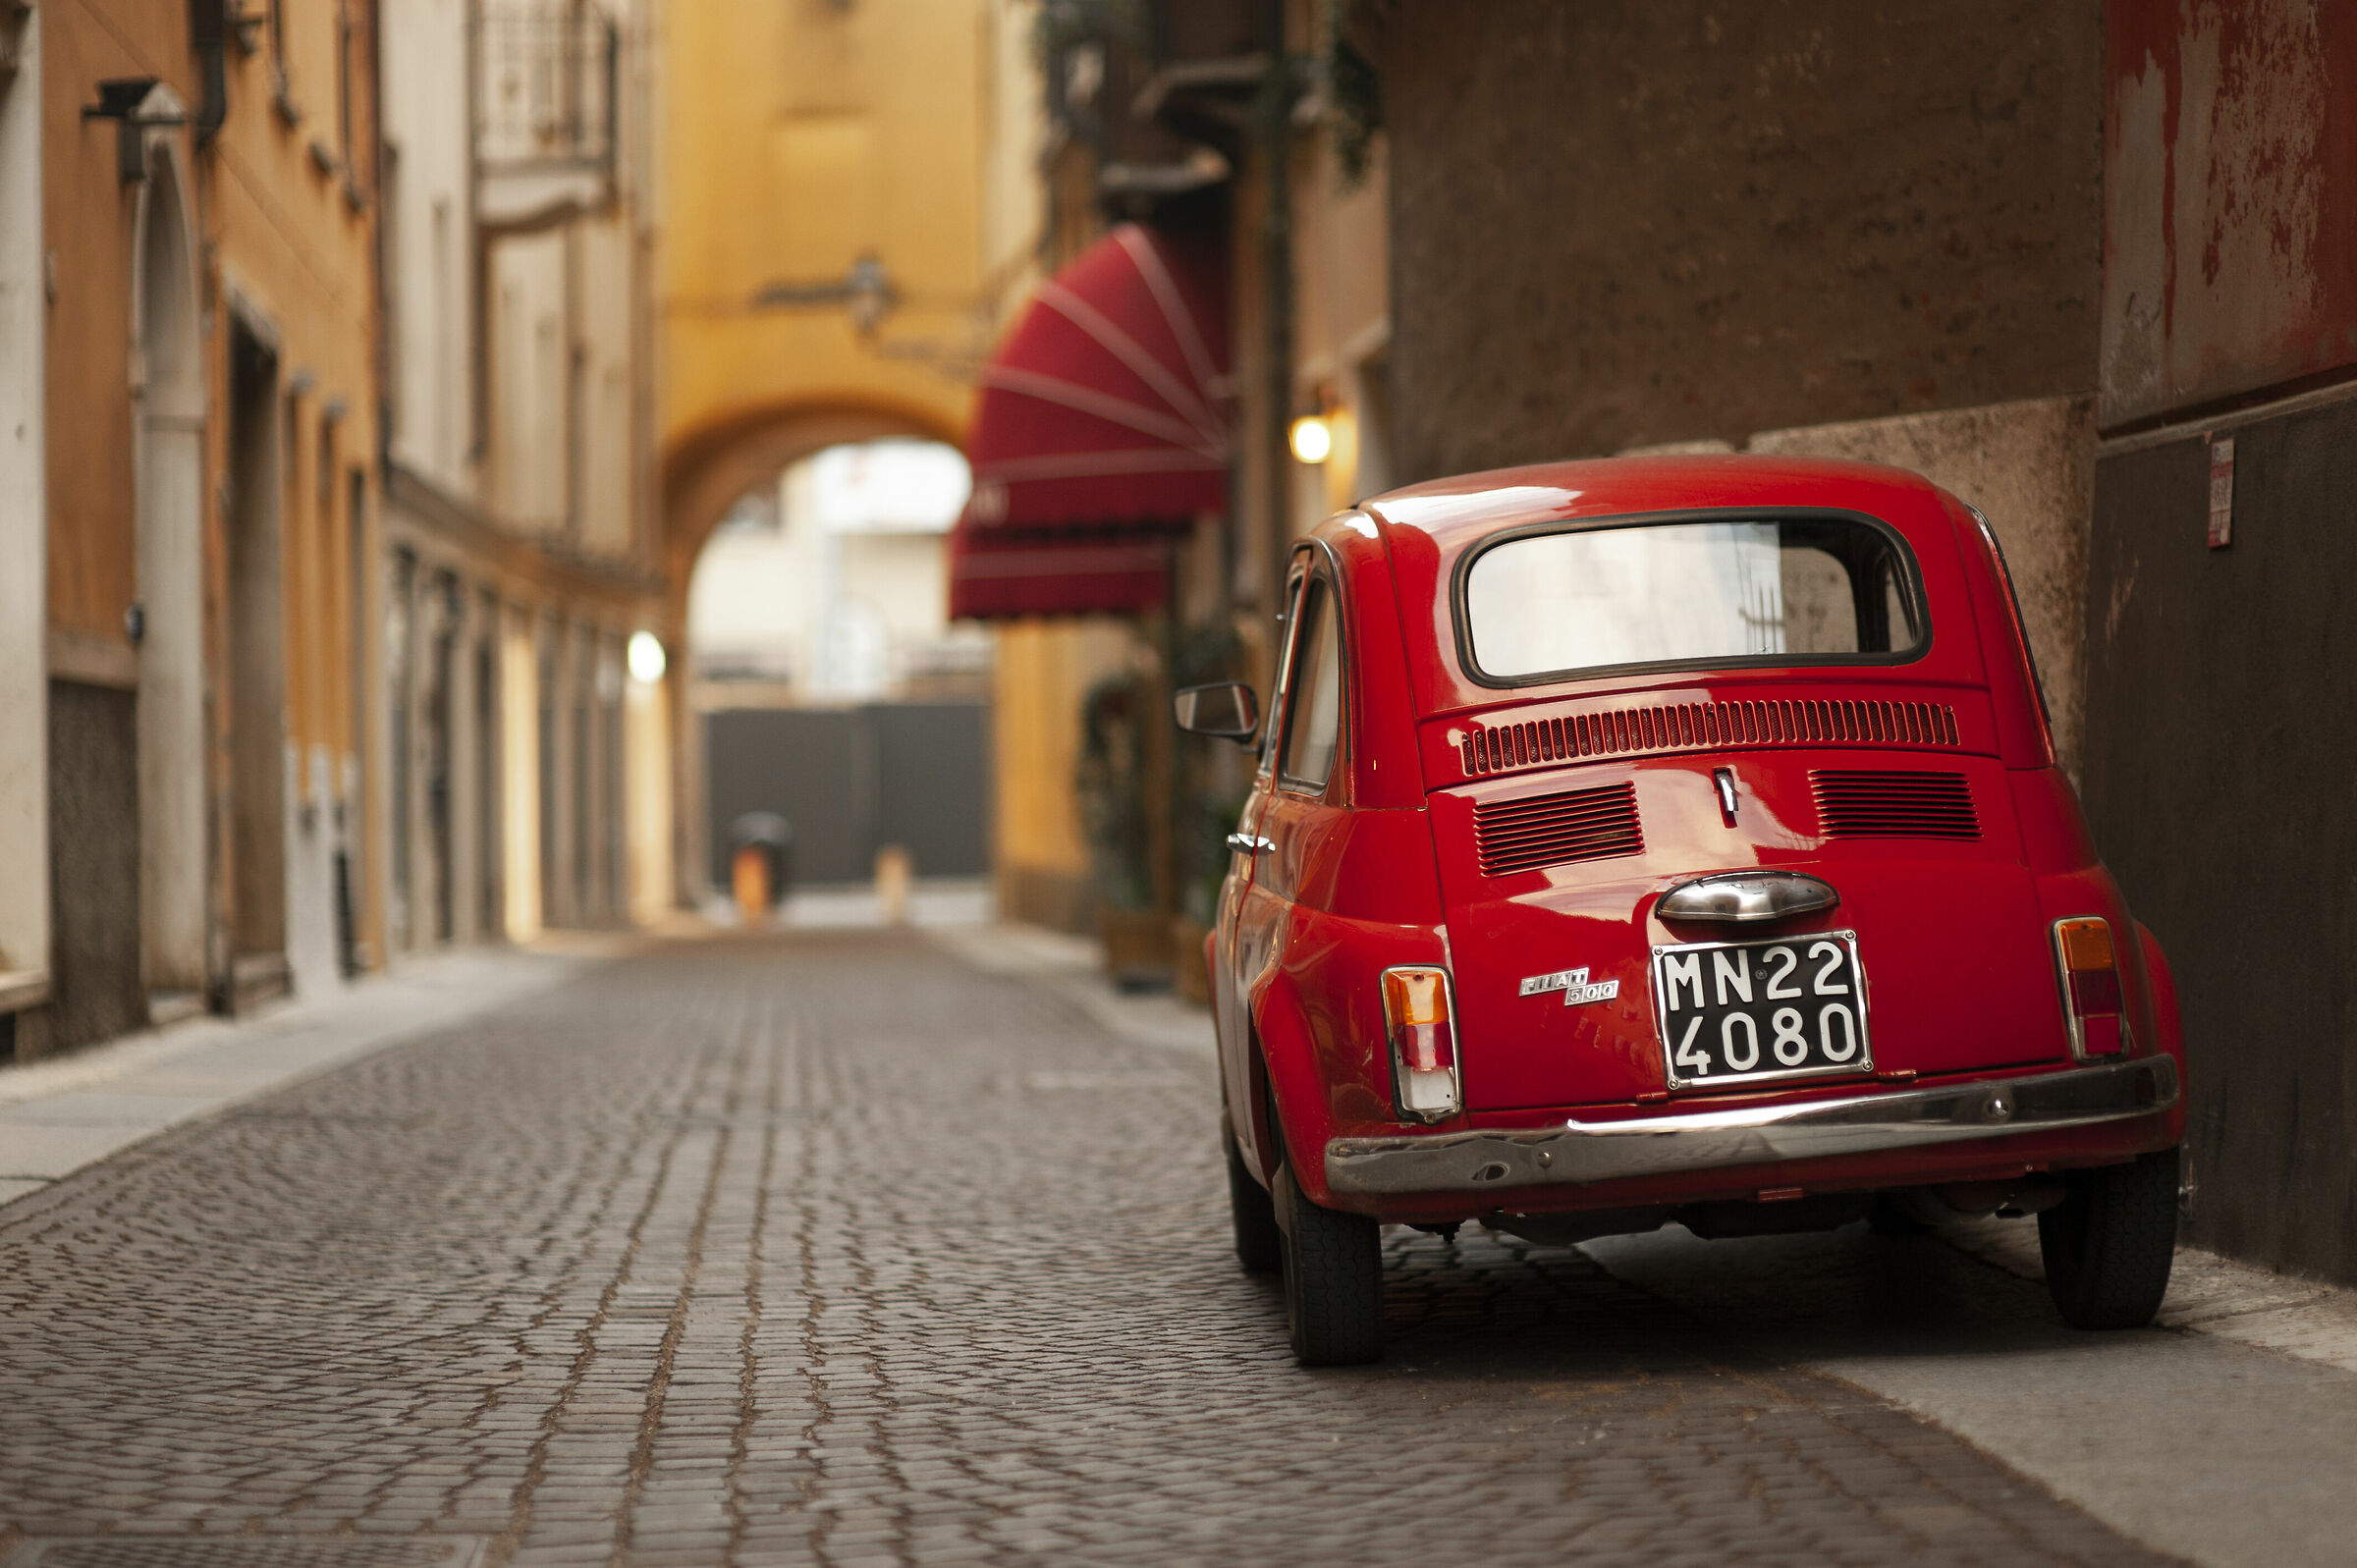 The old Fiat 500...